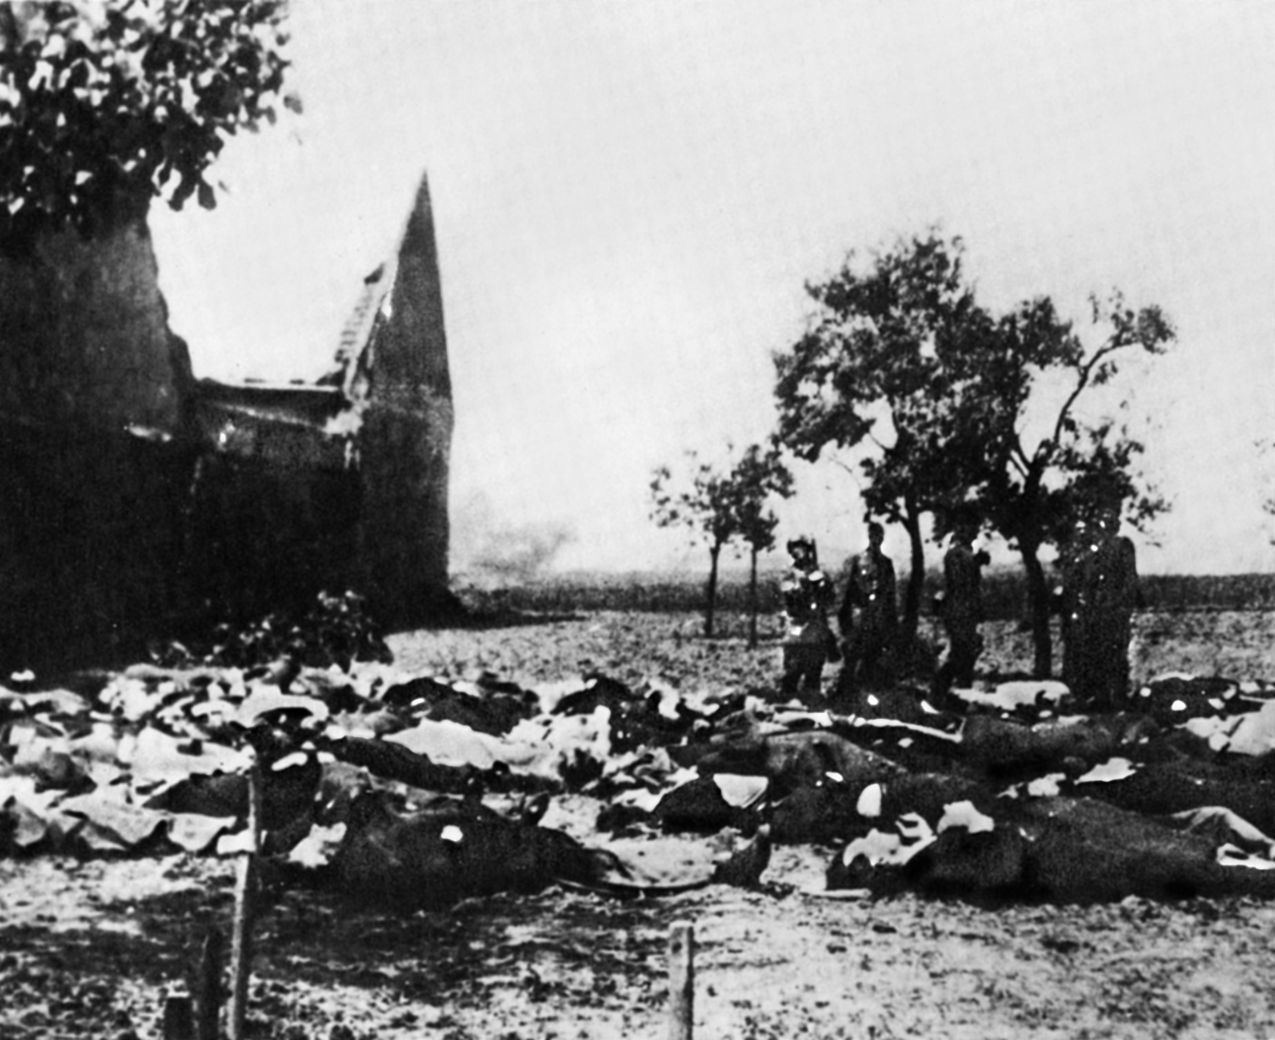 SS guards stand over the corpses of 172 men and boys of the village of Lidice, massacred in retaliation for the assassination of Heydrich.